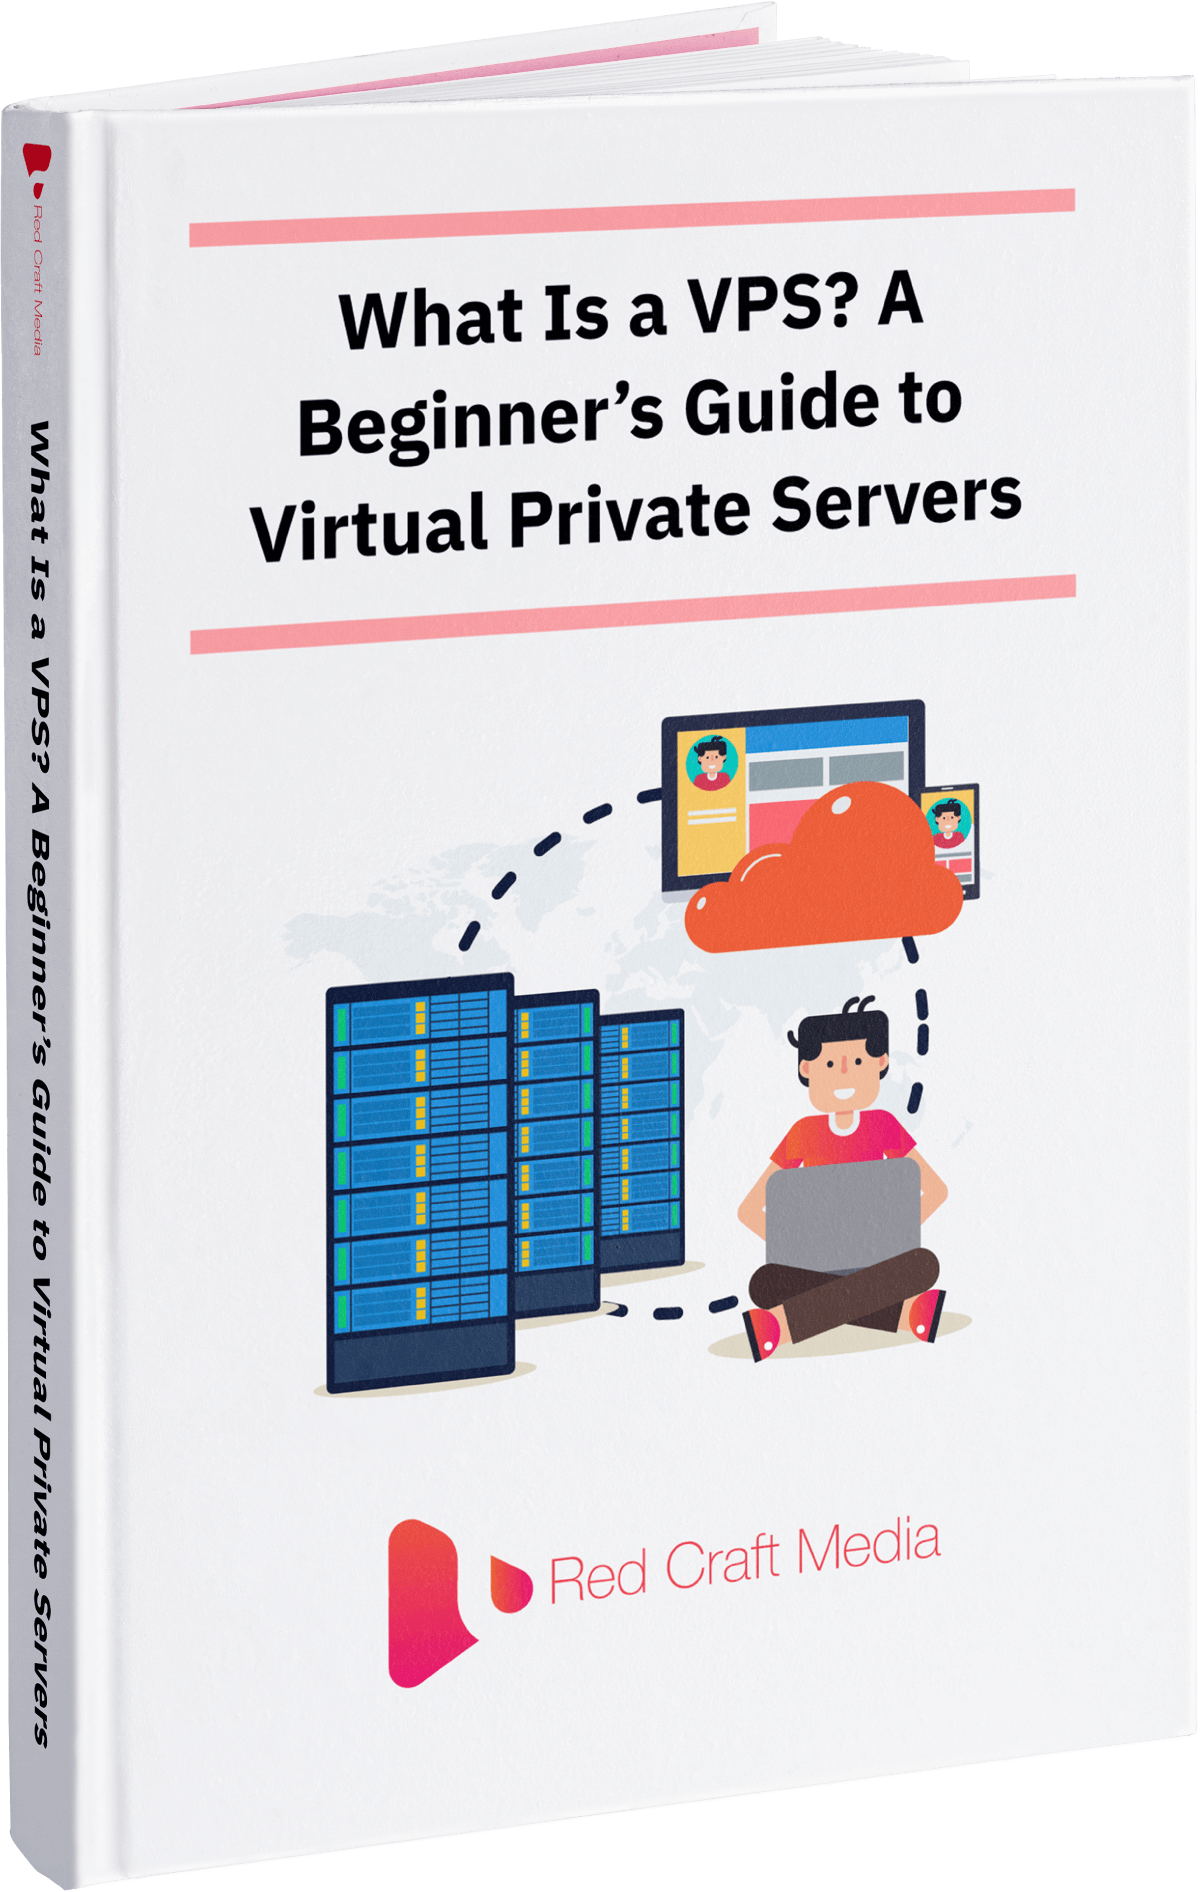 What Is a VPS? A Beginner’s Guide to Virtual Private Servers